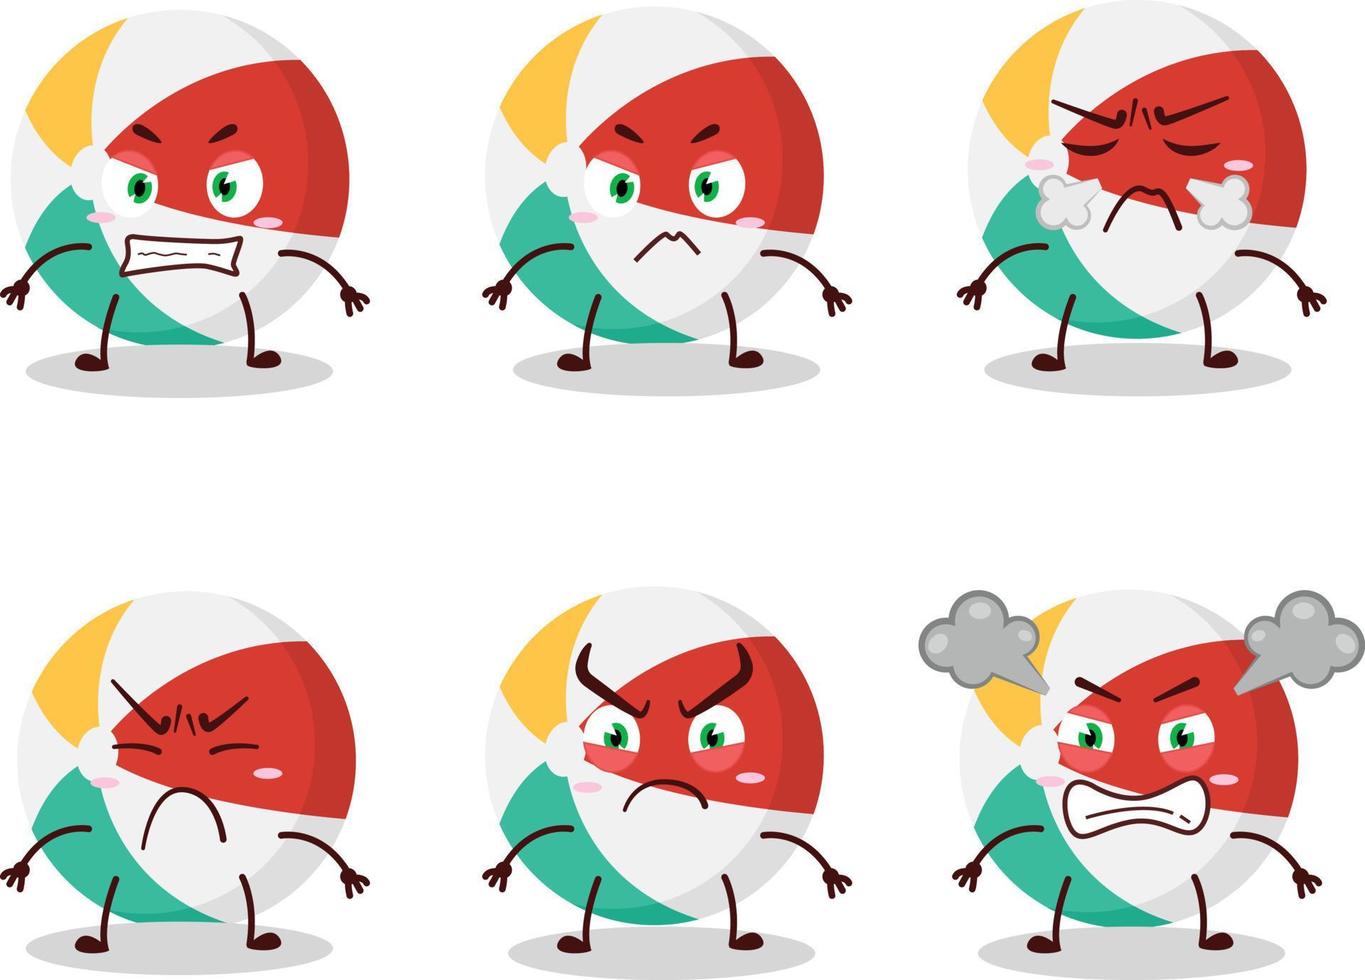 Beach ball cartoon character with various angry expressions vector